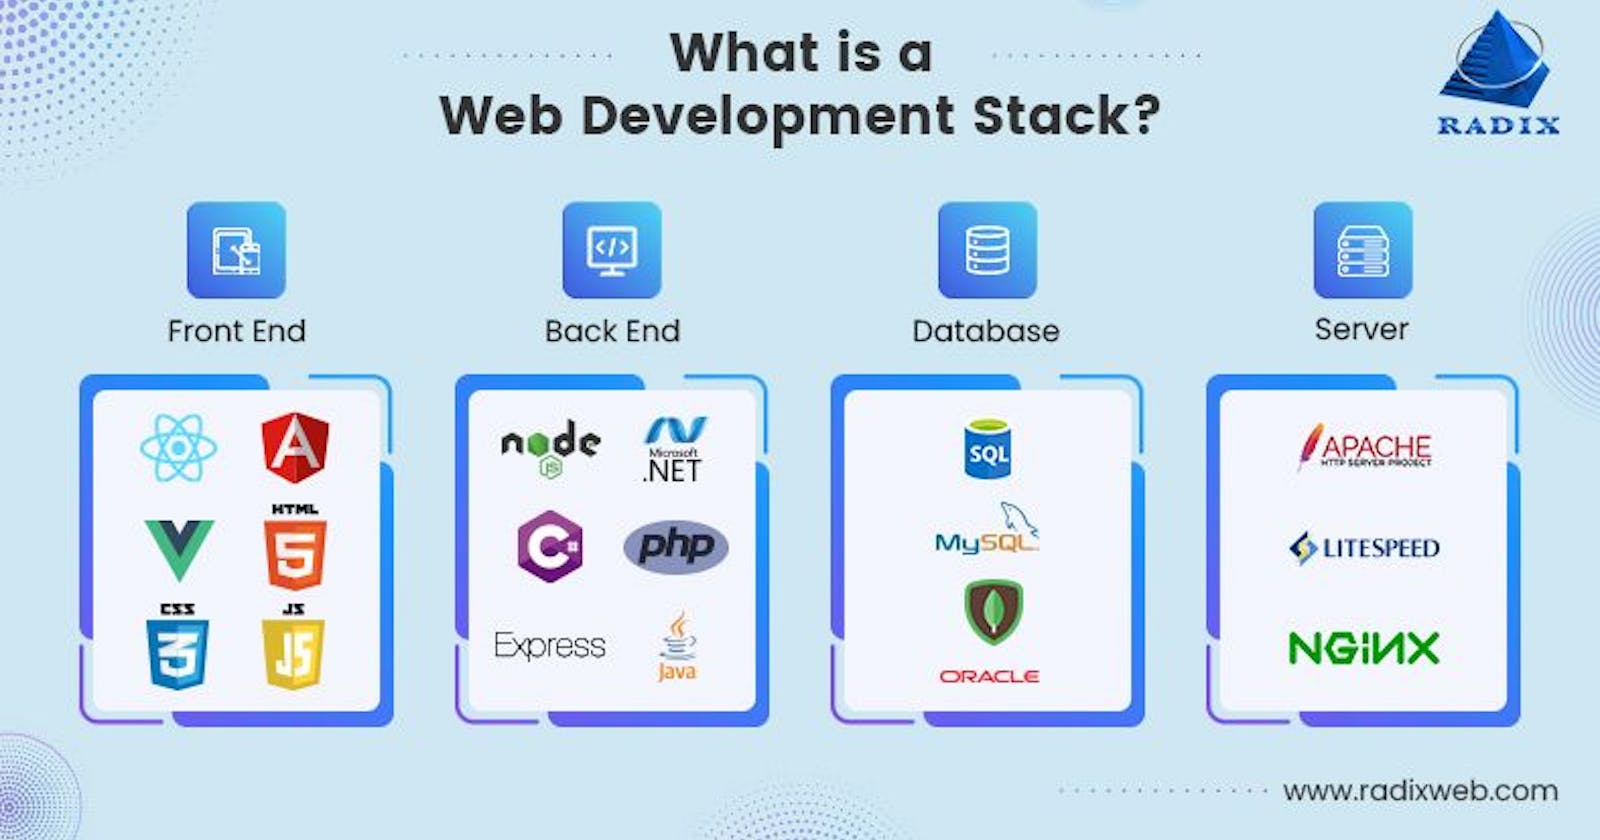 2022's top technology stack for web development